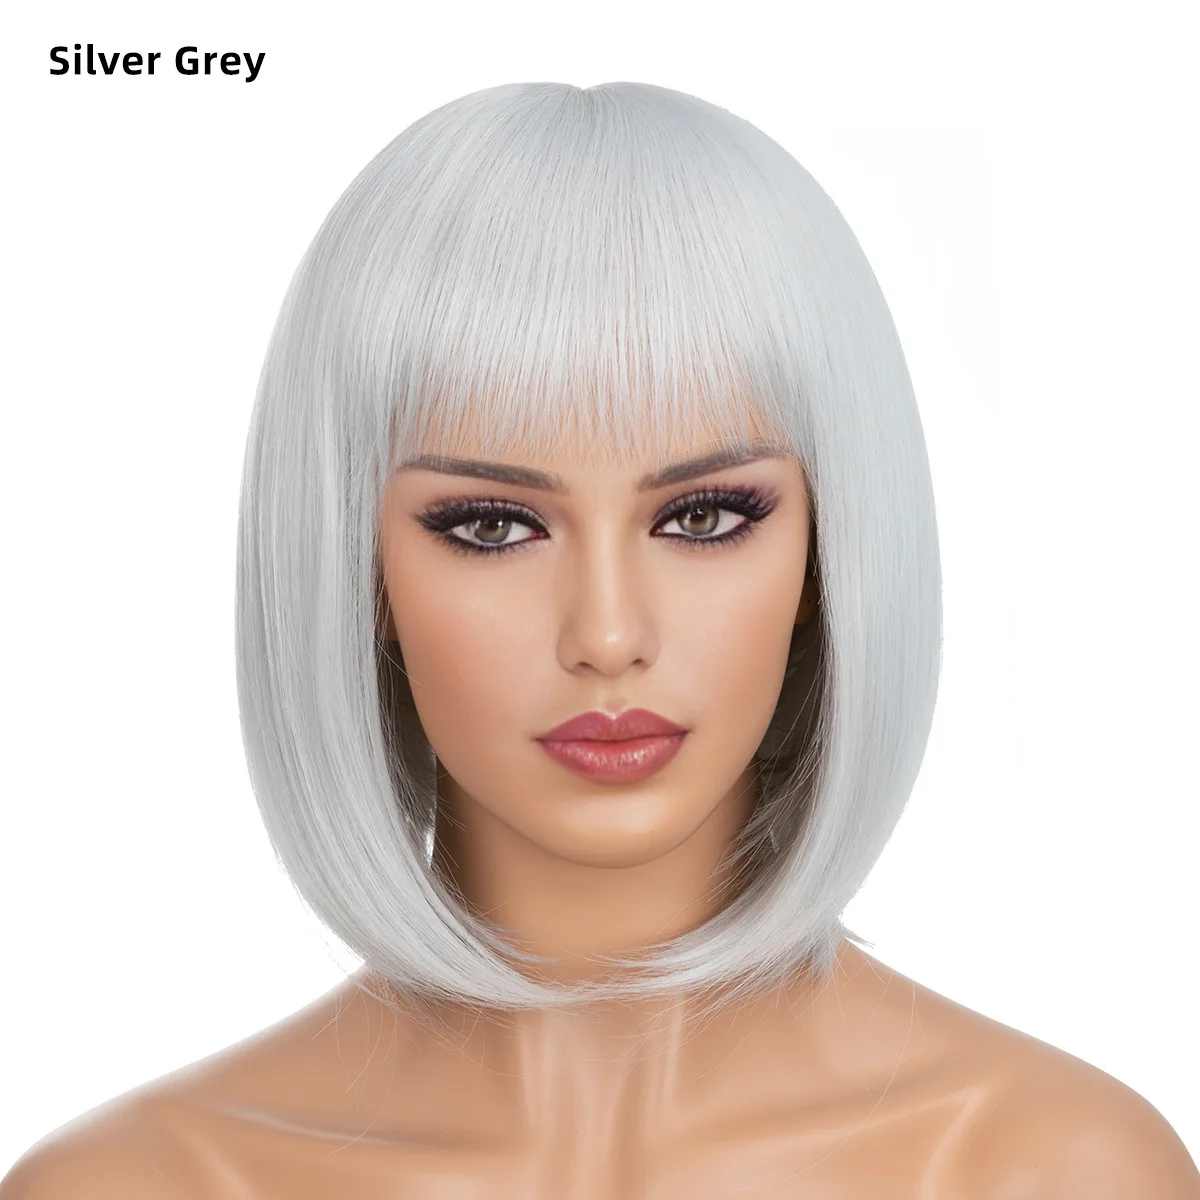 

Silver Grey Short Bob Wig With Bangs Synthetic Wigs For Women Ombre Hot Pink Lolita Cosplay Party Natural Hair Perruque Bob